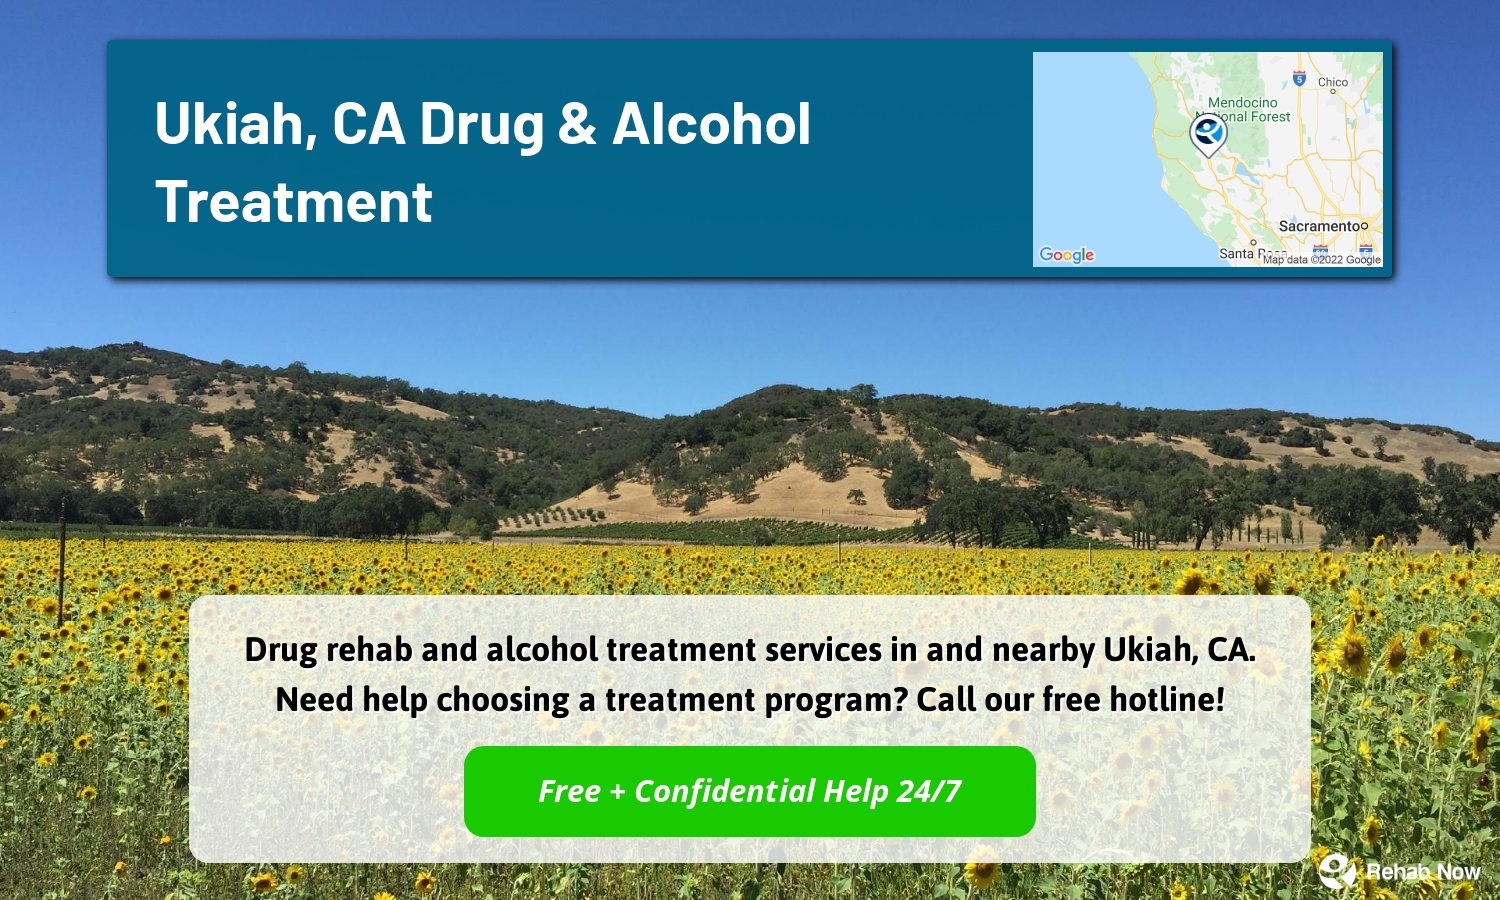 Drug rehab and alcohol treatment services in and nearby Ukiah, CA. Need help choosing a treatment program? Call our free hotline!